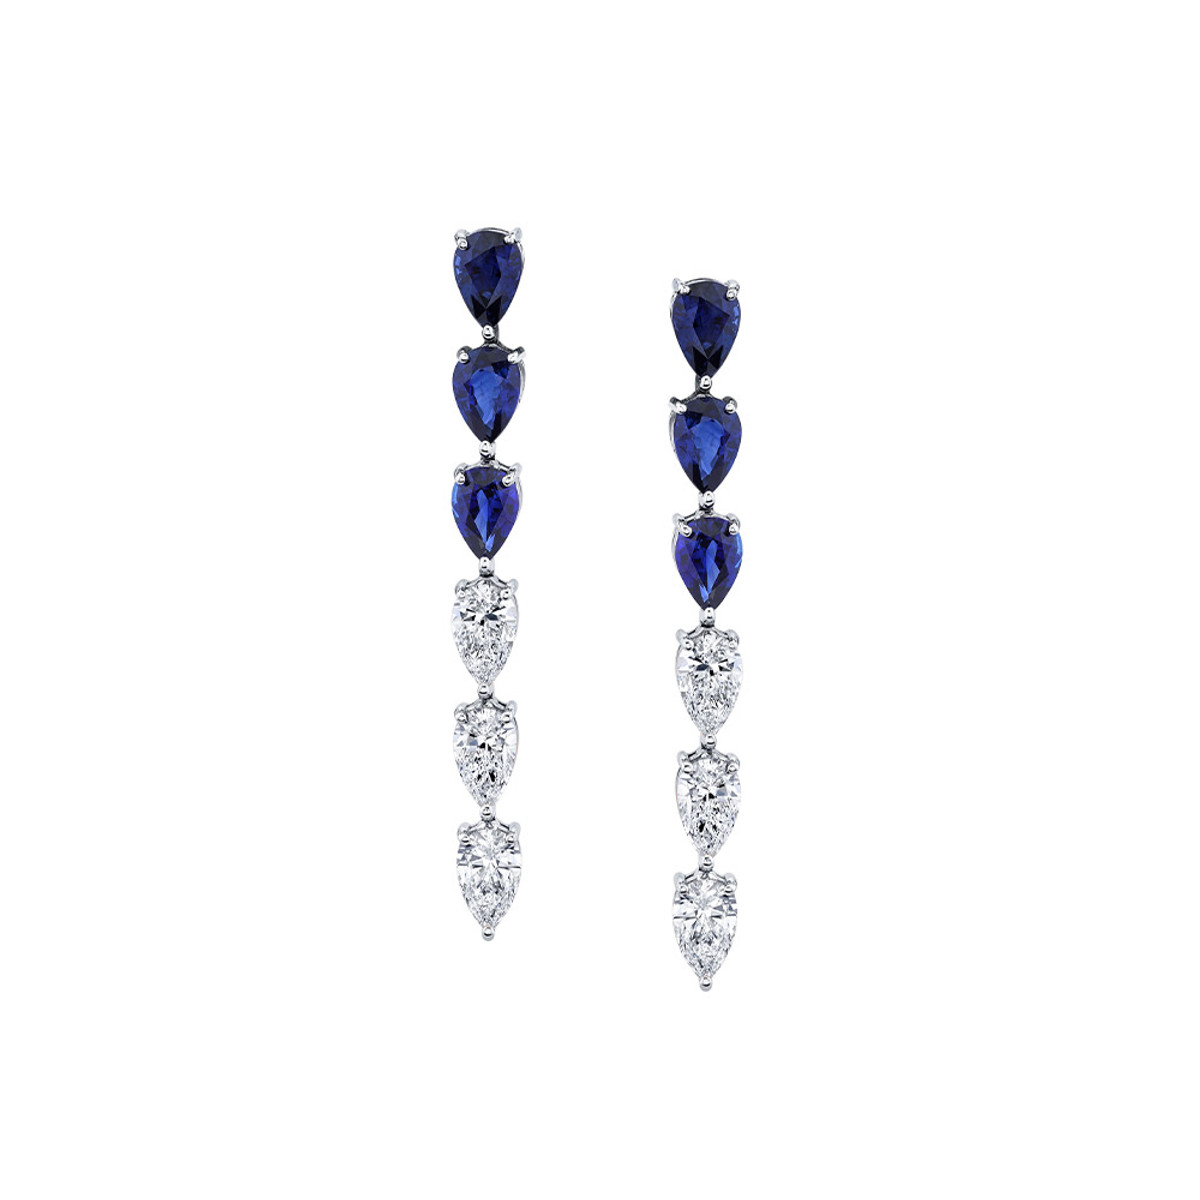 Hyde Park Collection 18K White Gold Sapphire and Diamond Earrings-44017 Product Image